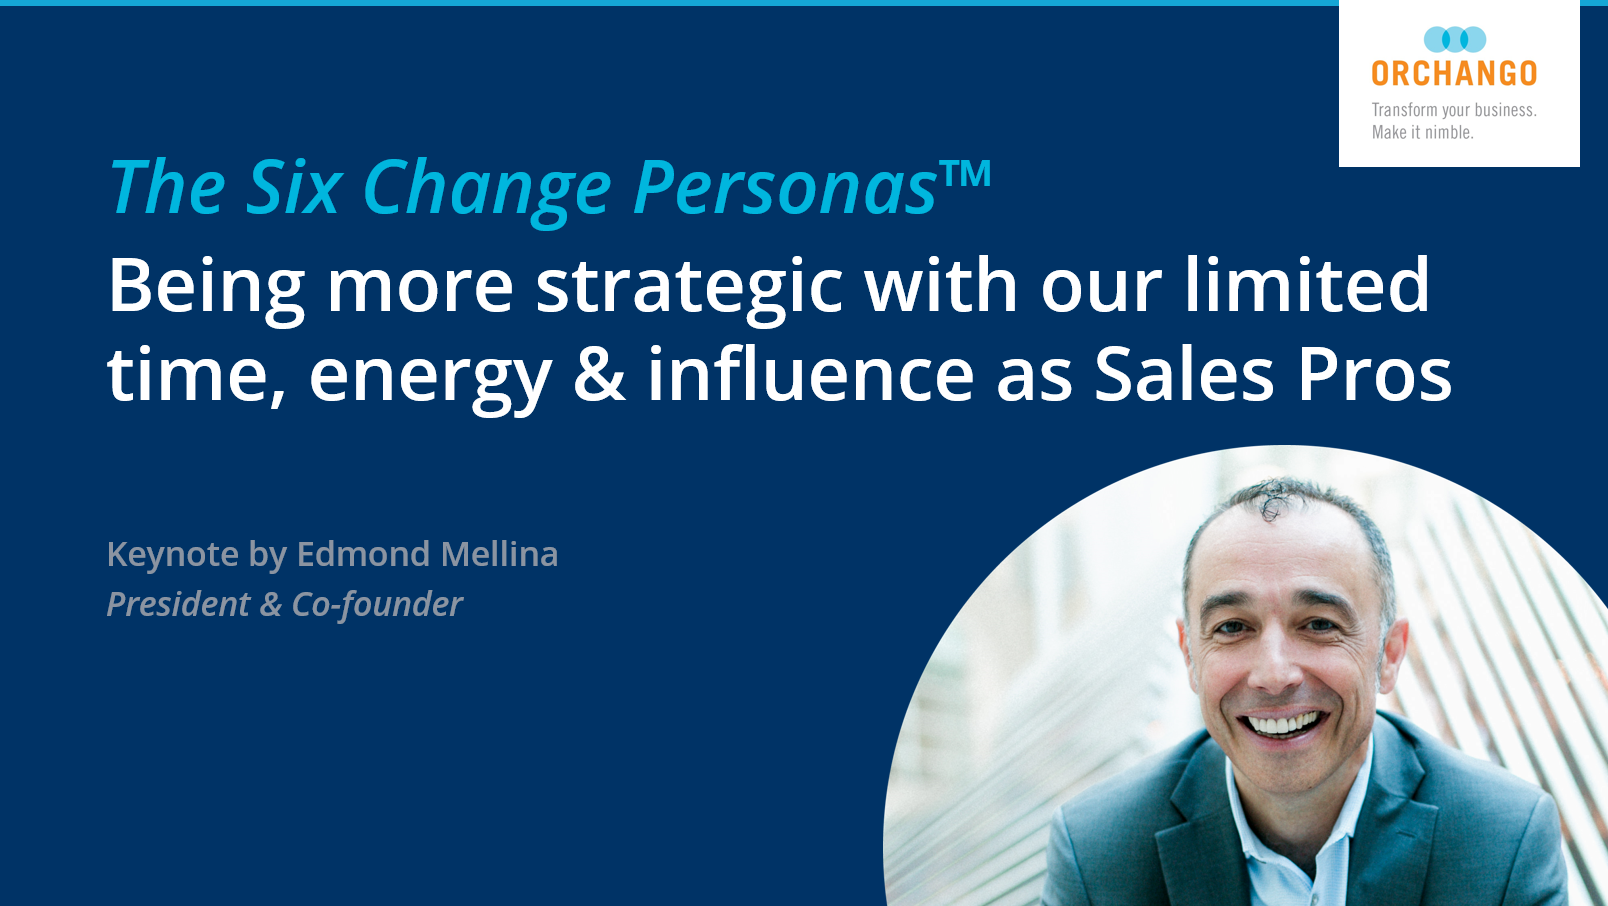 Keynote by Edmond Mellina titled: The Six Change Personas™ -Being more strategic with our limited time, energy & influence as Sales Pros